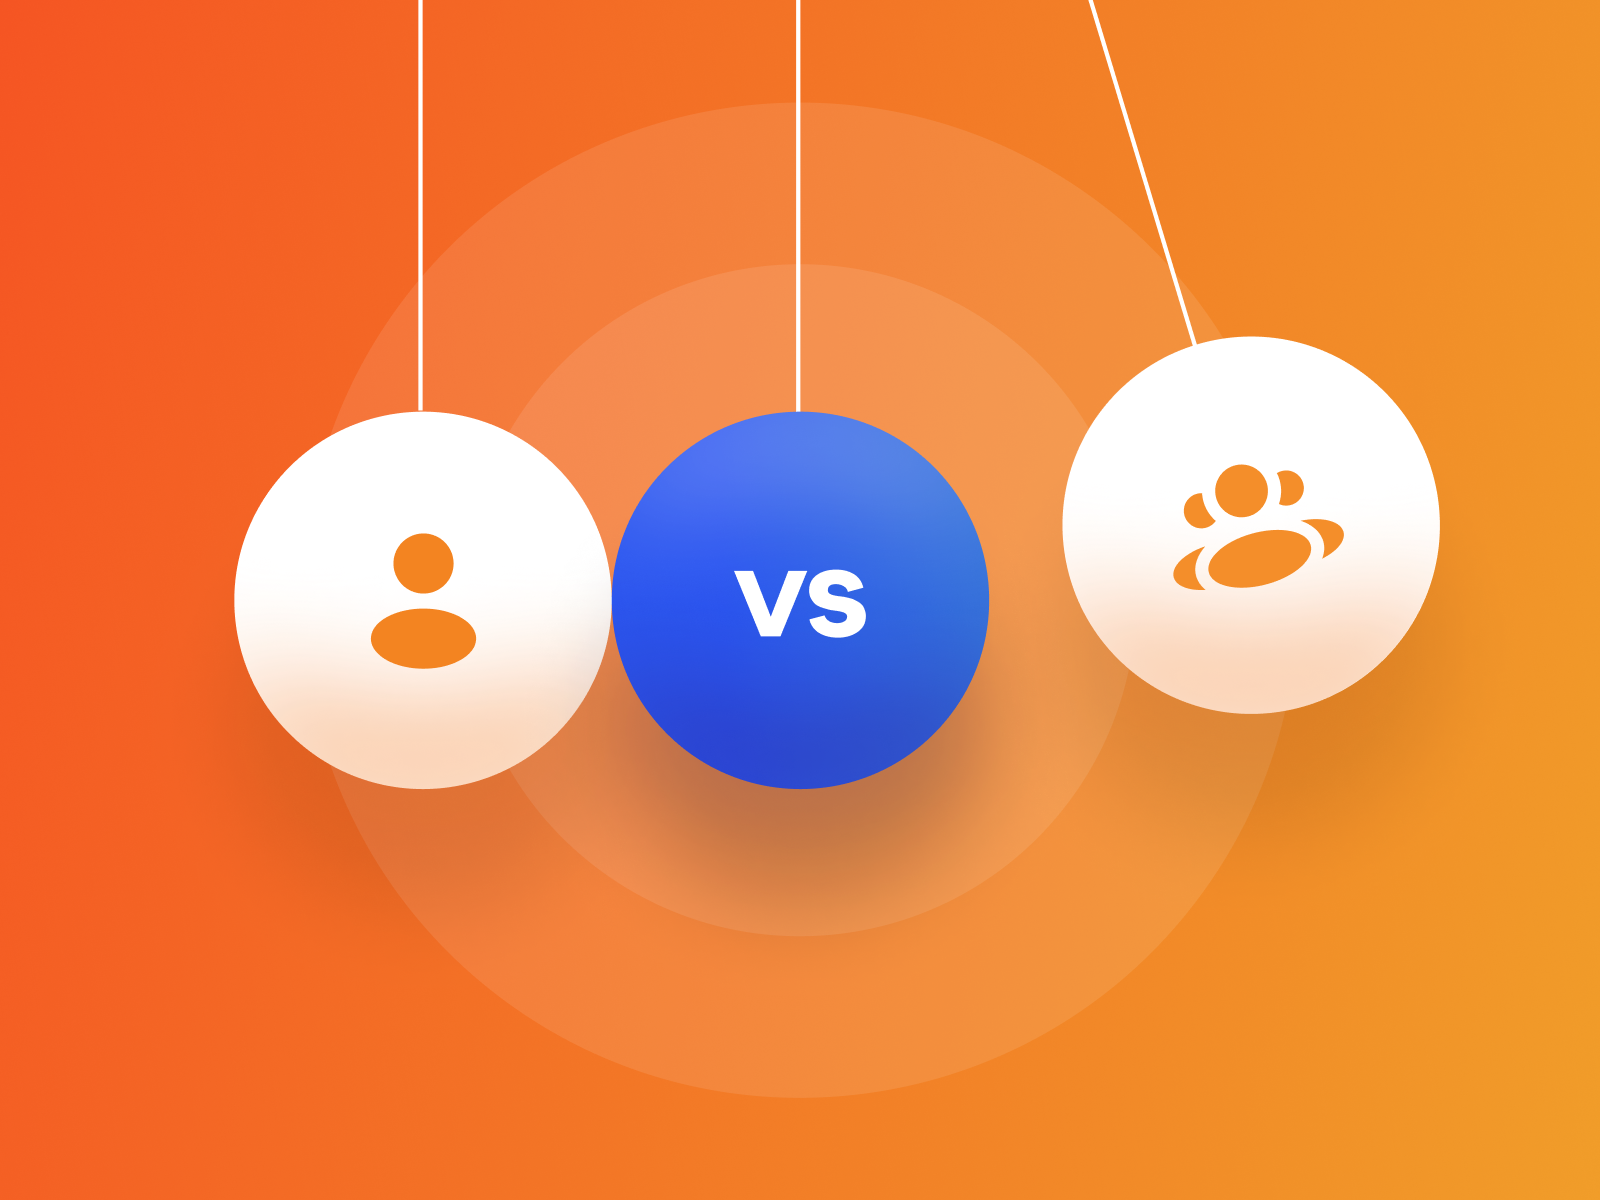 Freelance versus Team: who is better to work with?